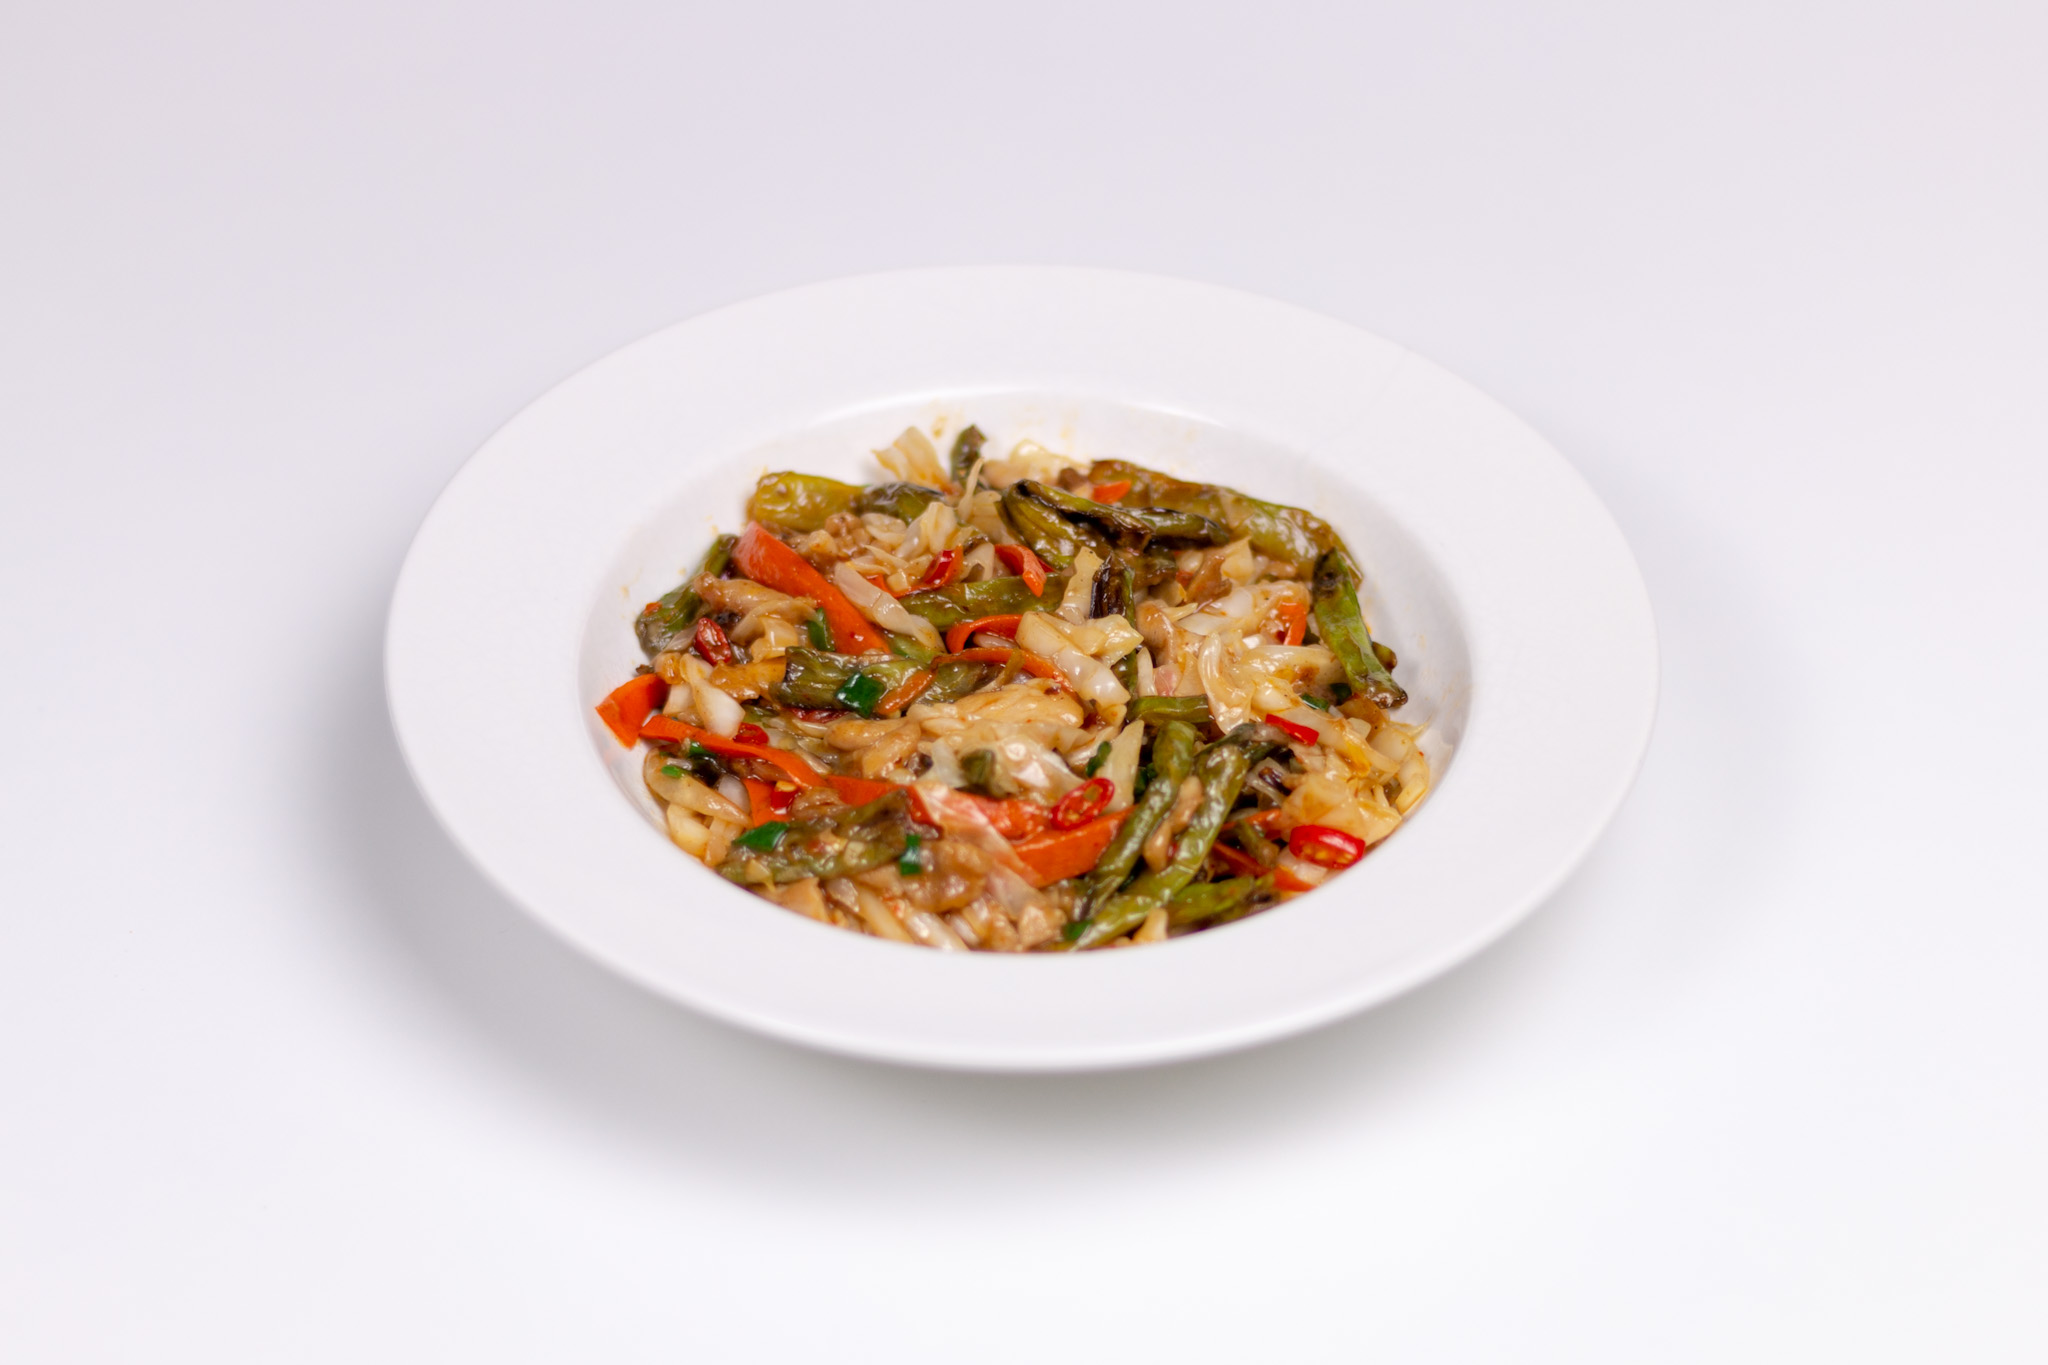 Shredded Chicken Stir-Fry with Mixed Paocai